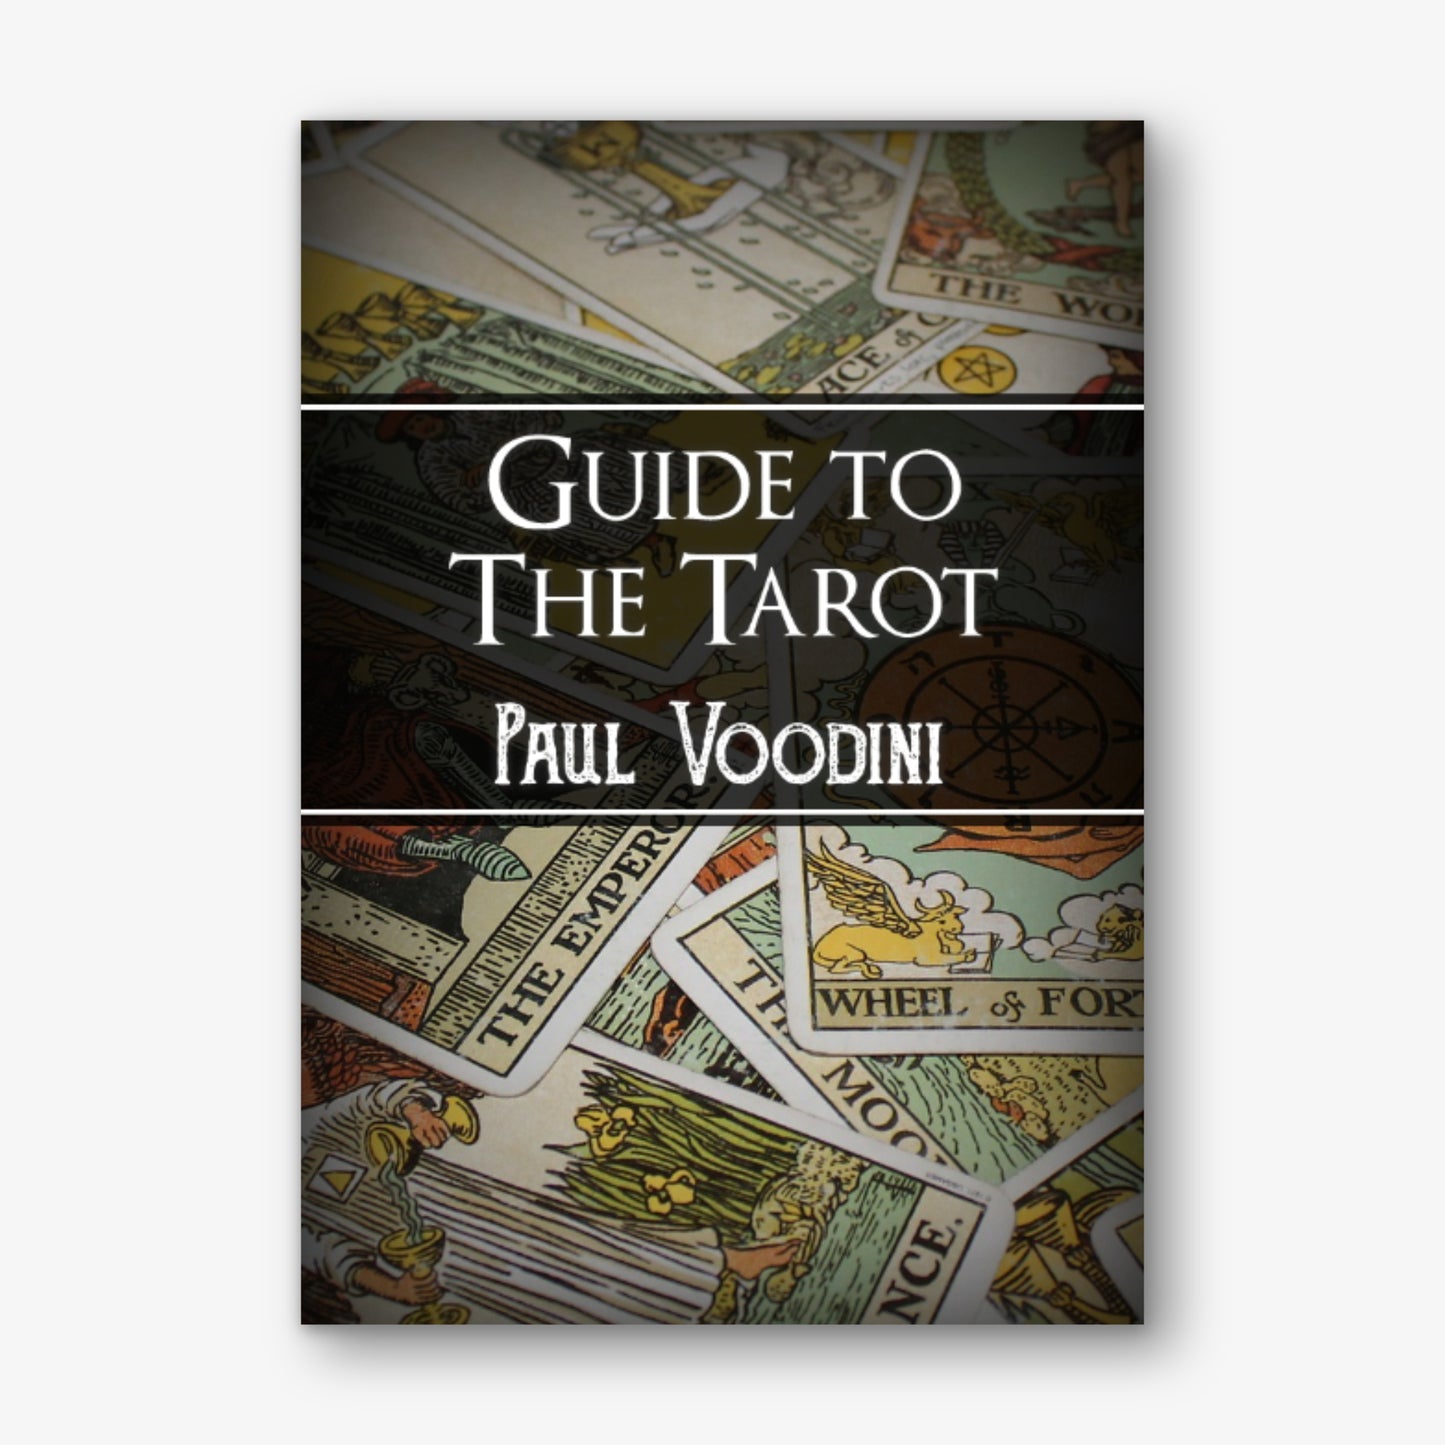 Guide to the Tarot by Paul Voodini